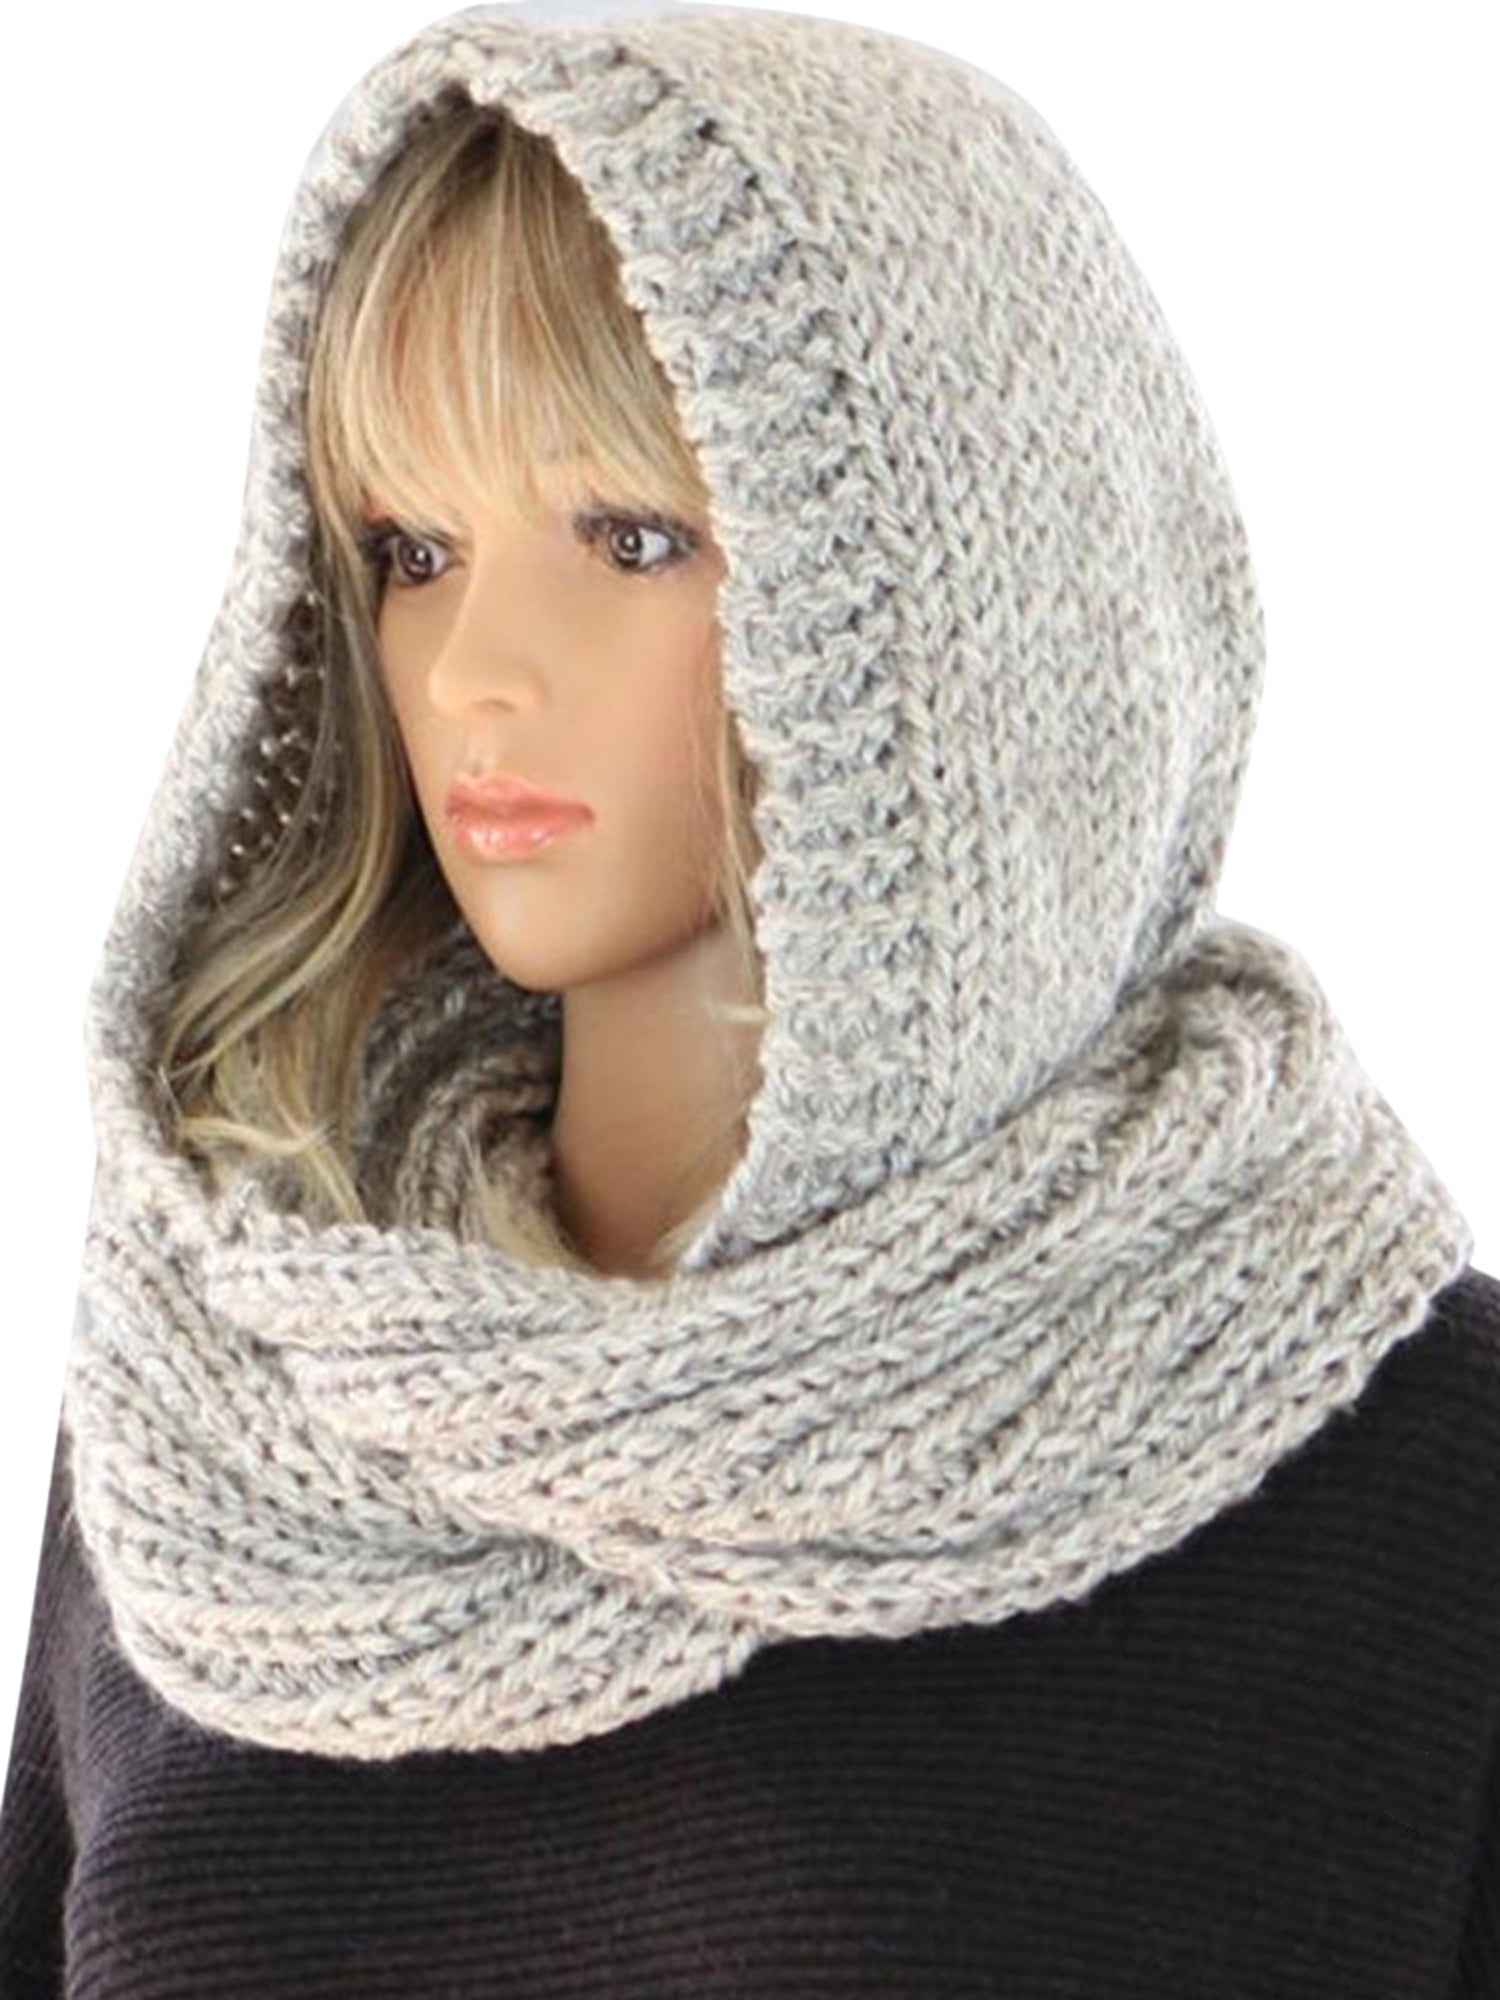 Children’s Winter Knitted Hooded Scarf Neck Ear Warmer Wrap Solid Color Scarves